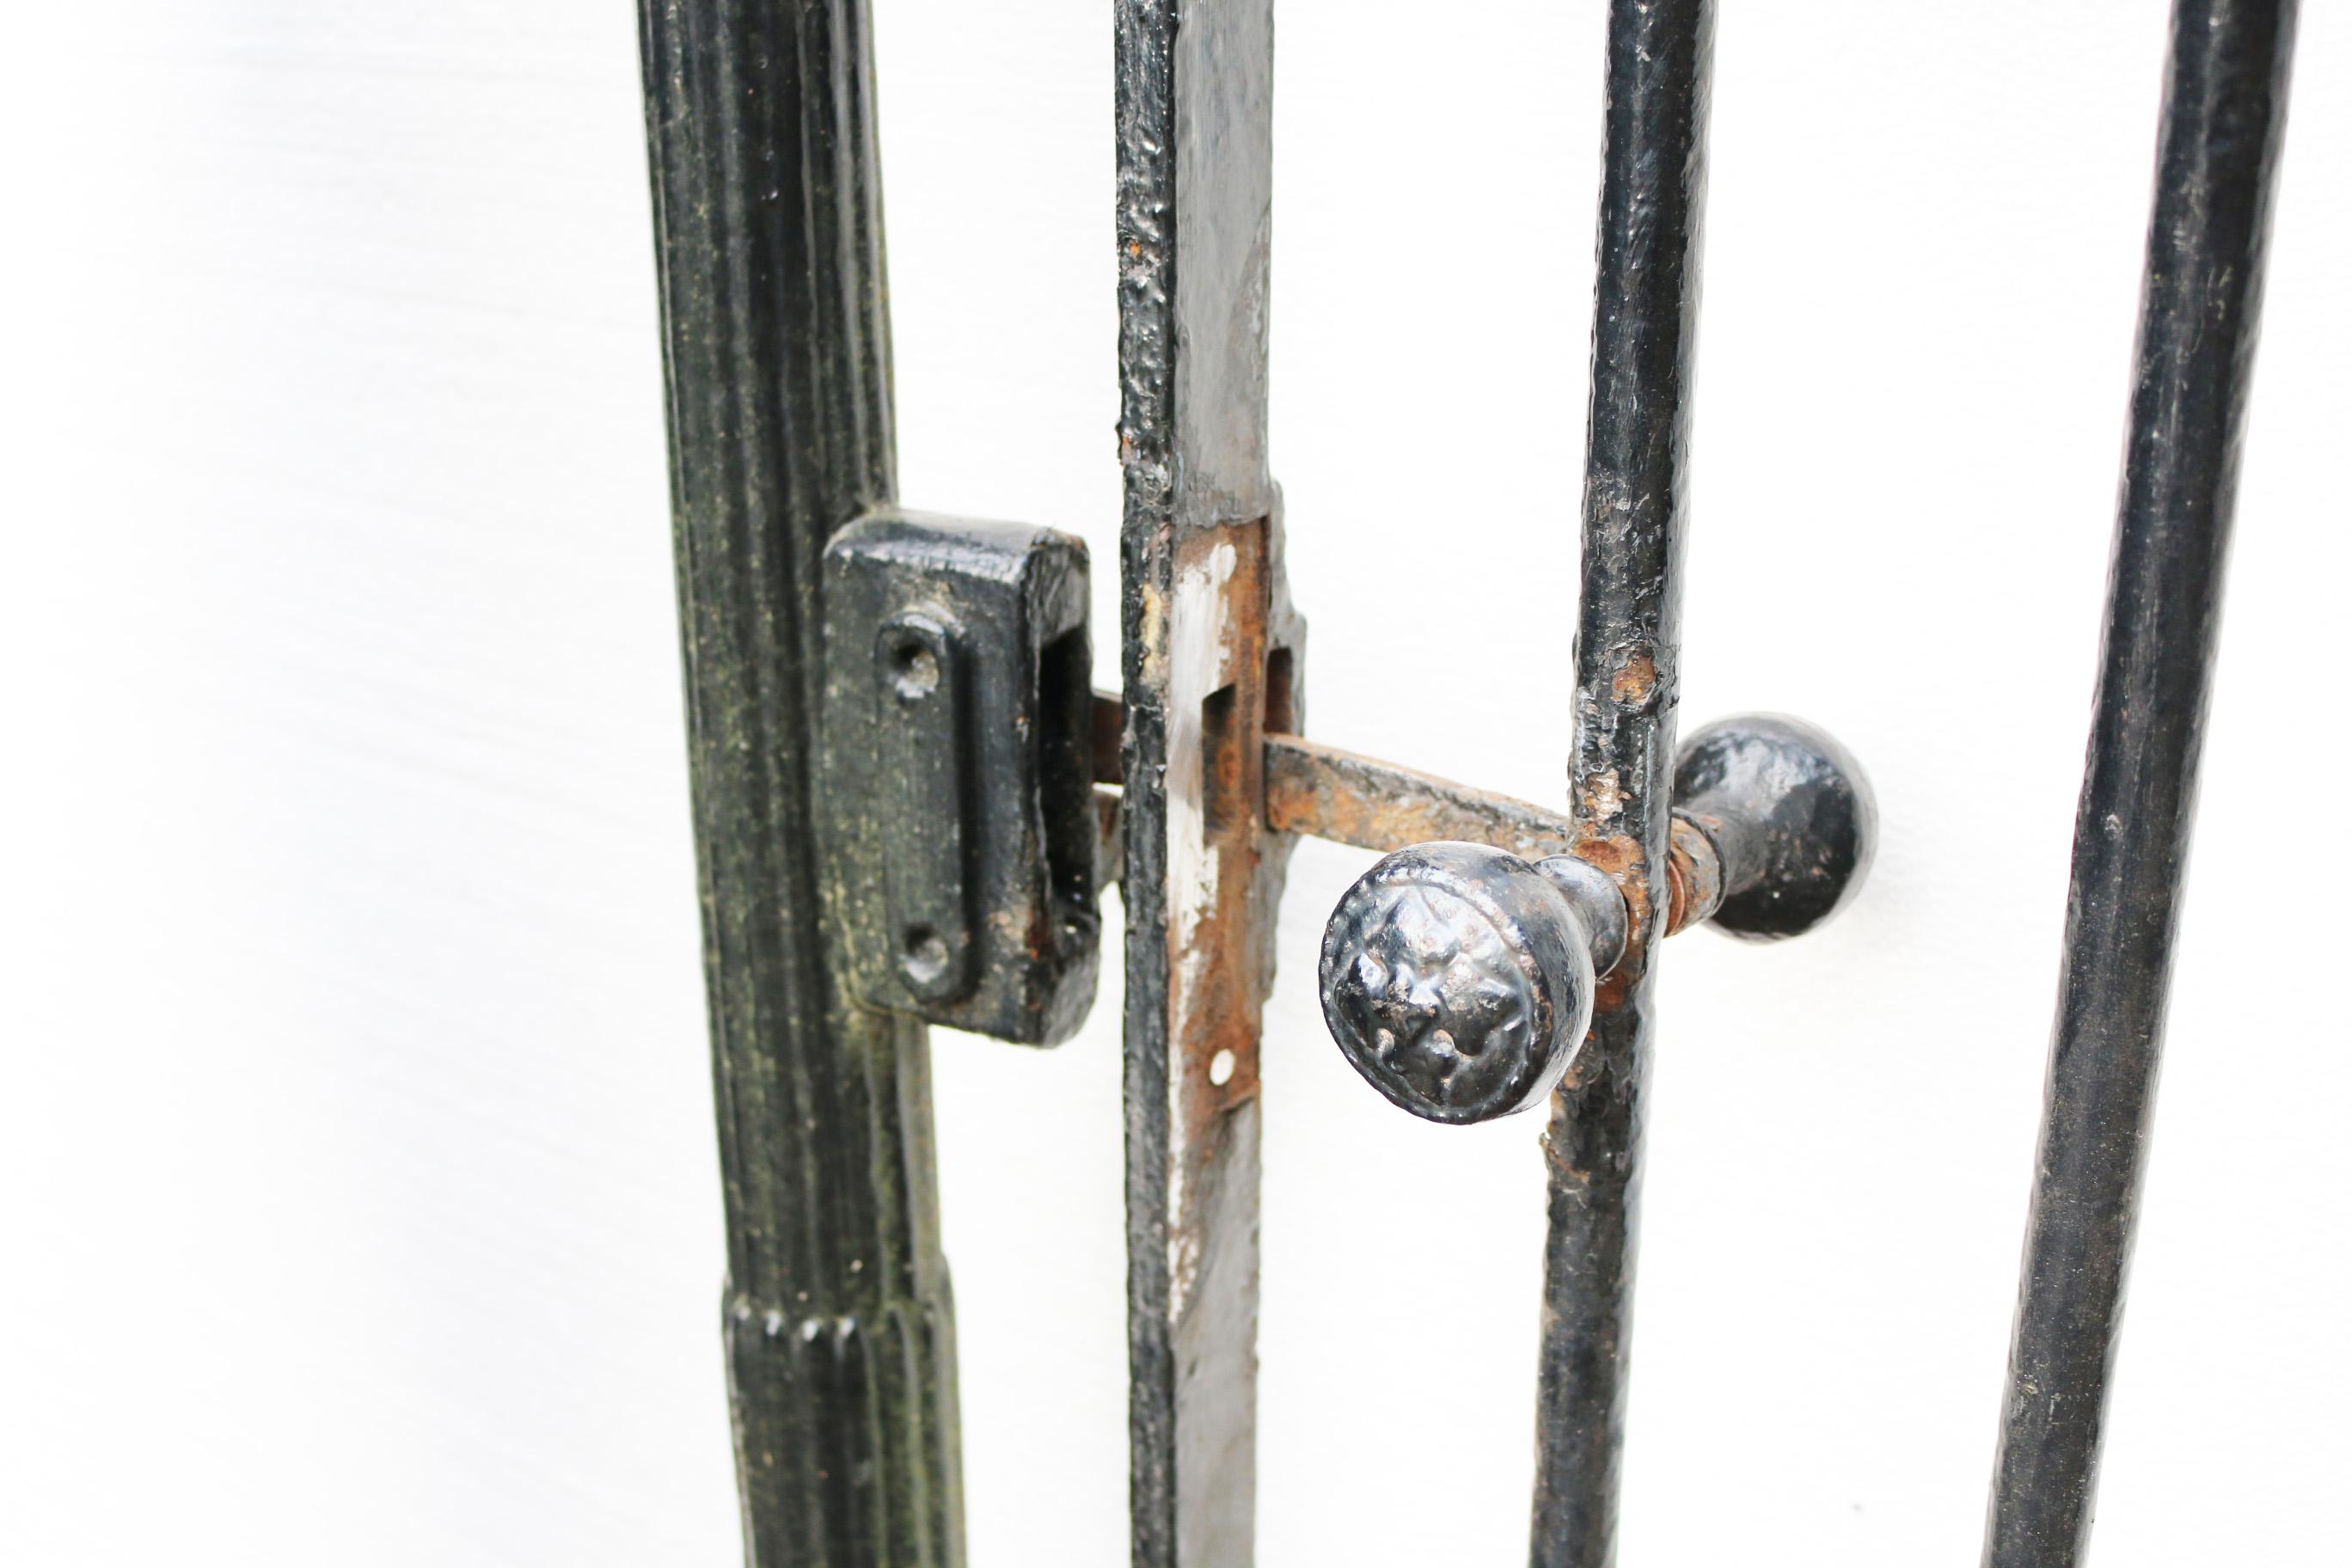 About

An antique Wrought iron gate with cast iron posts, dating to the 1880s. 

Condition report:

Surface rust in areas, excellent structural condition. Old black paint, flaking in places. Top hinge present and working. We have the bottom